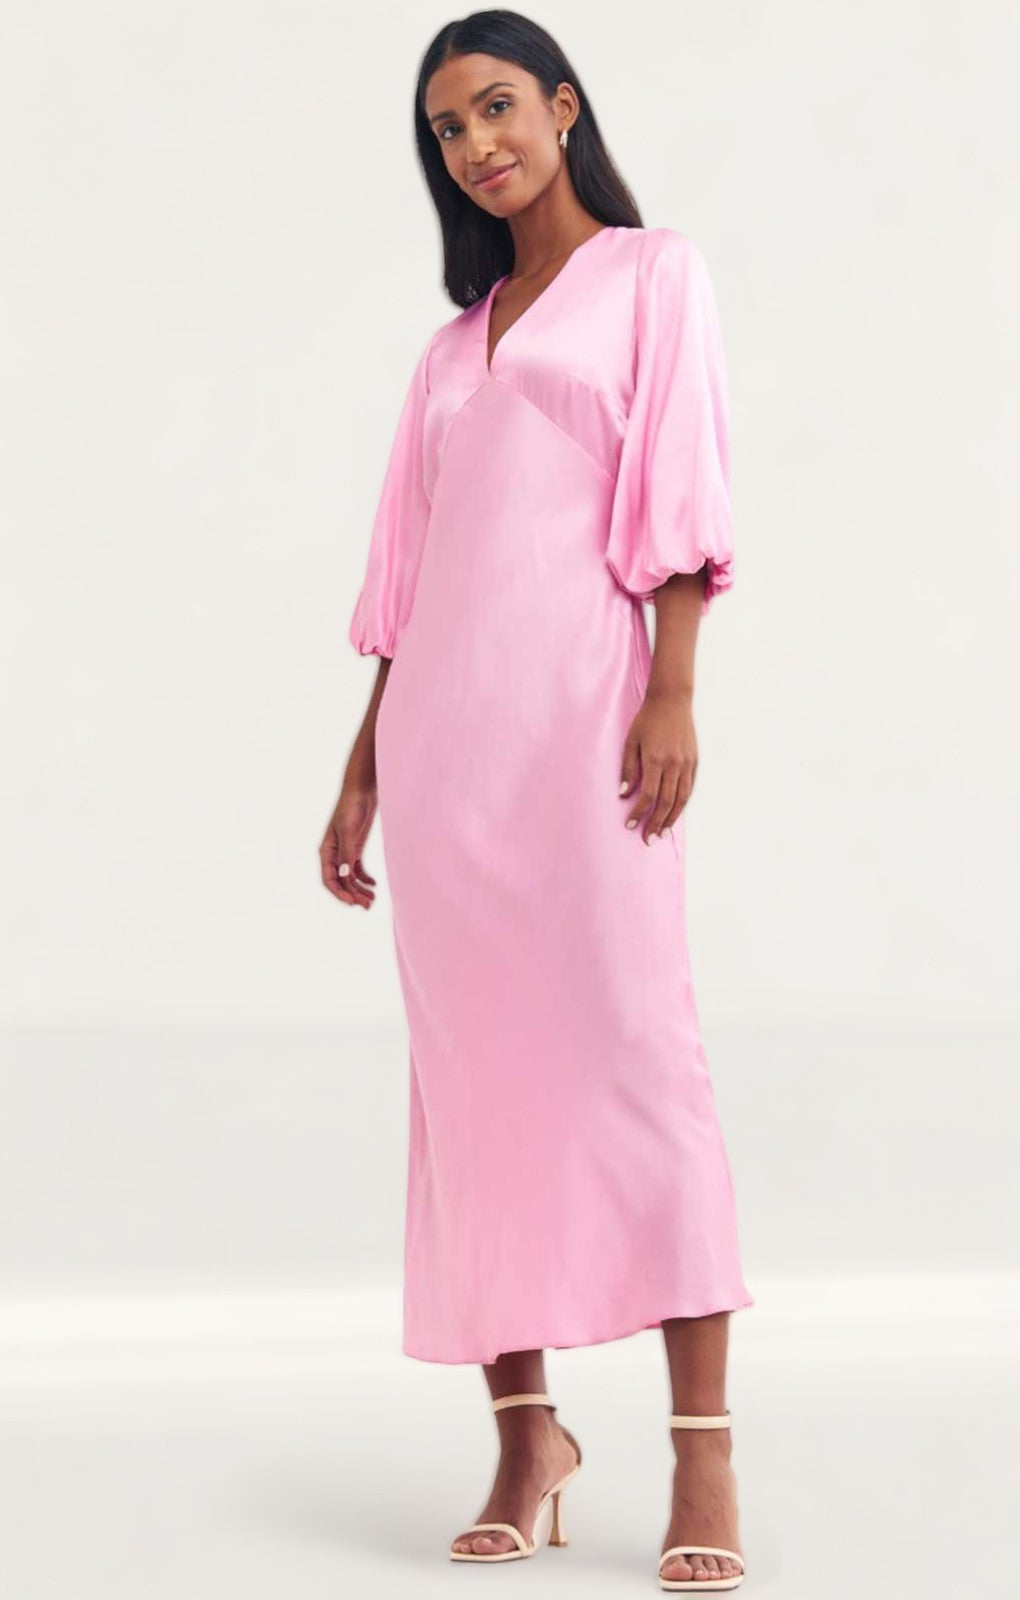 Nobody's Child Ciara V Neck Dress in Pink product image